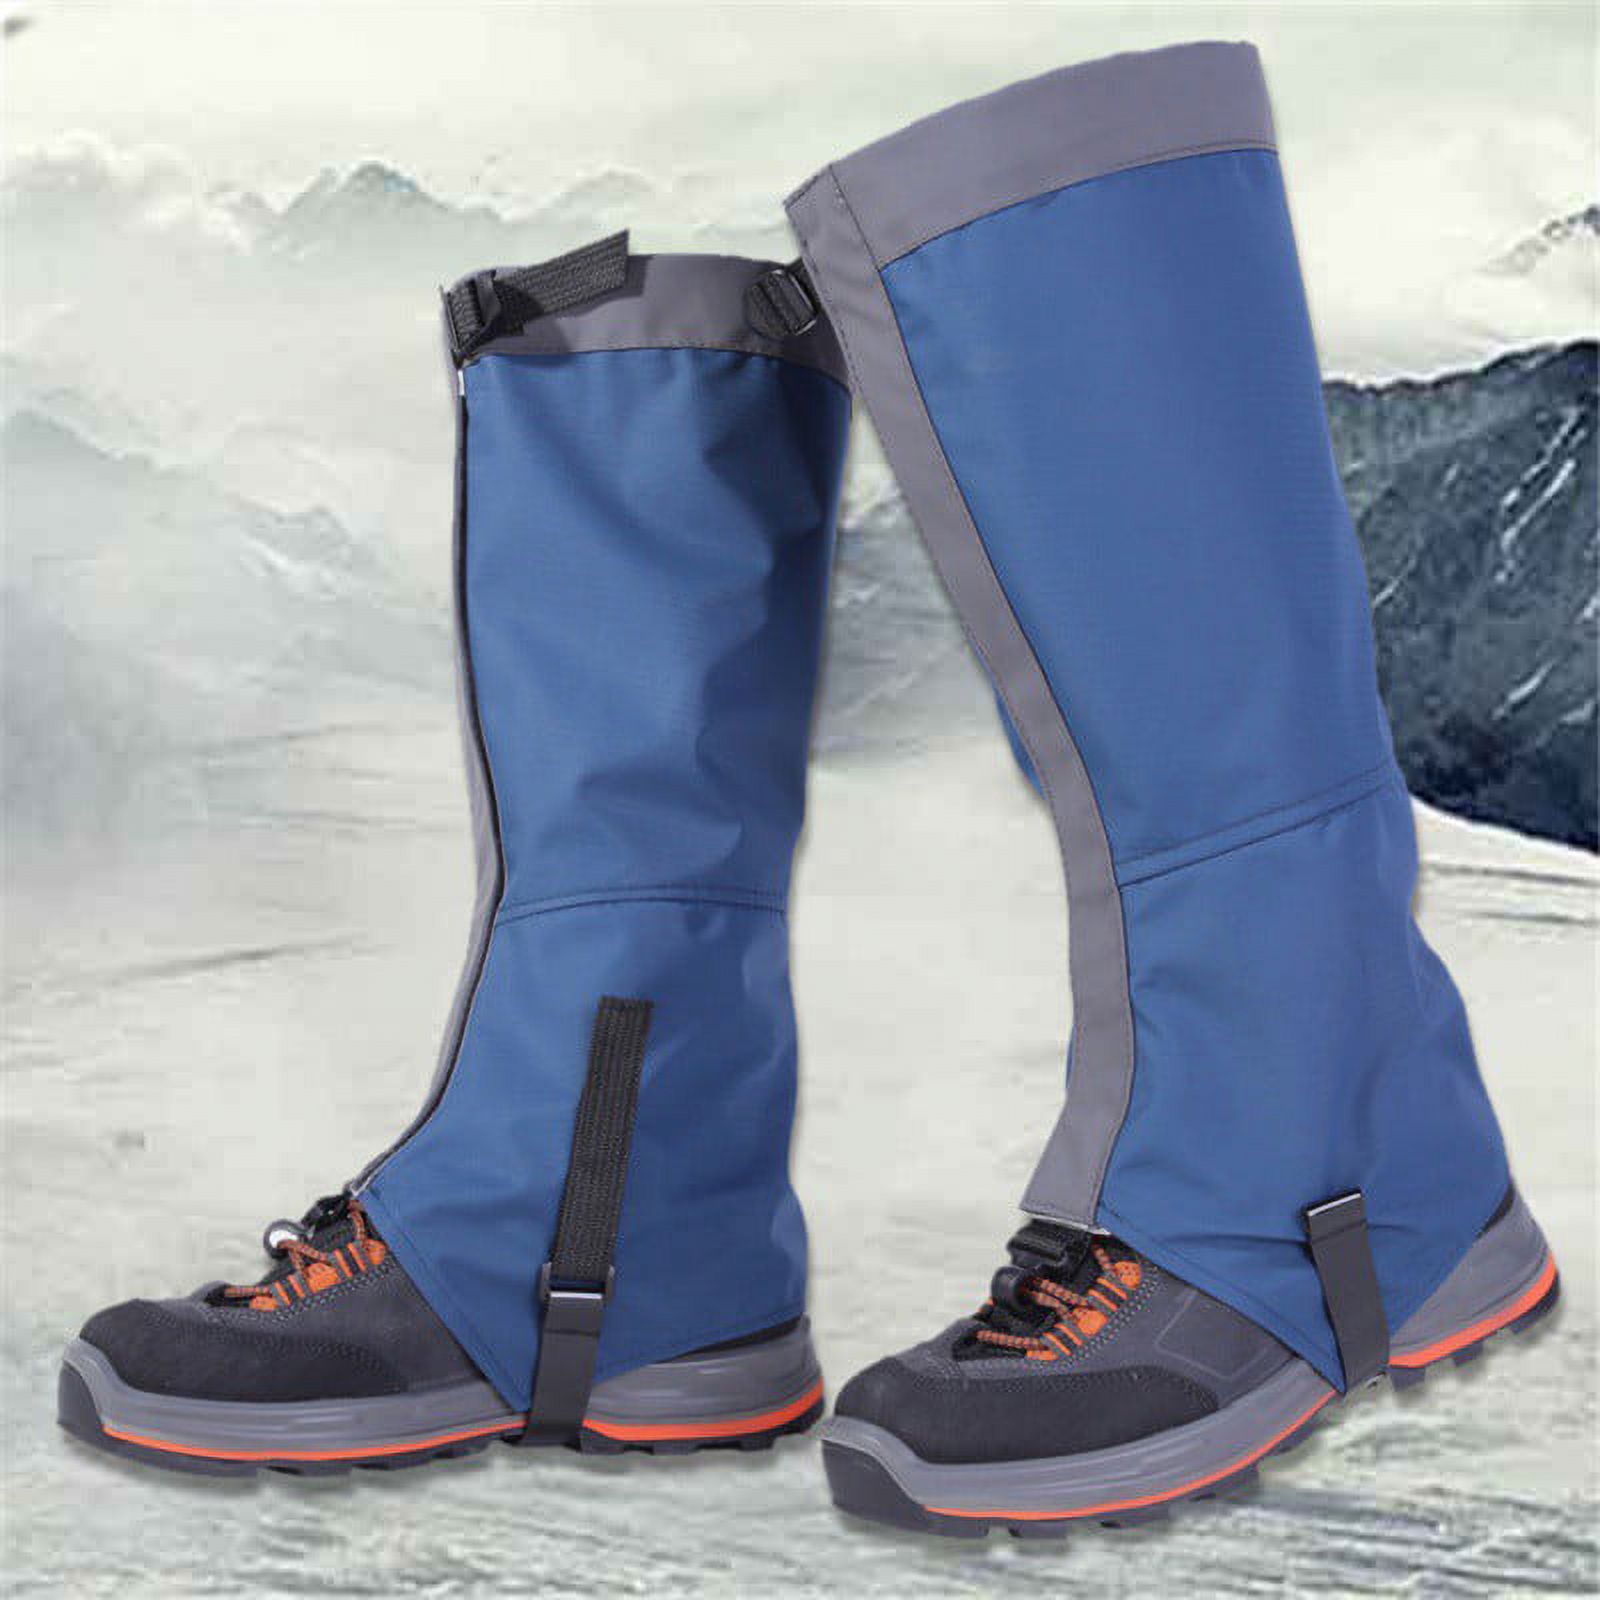 Outdoor Mountain Hiking Hunting Boot Gaiters Waterproof Snow Snake High Leg Shoes Cover - image 1 of 9